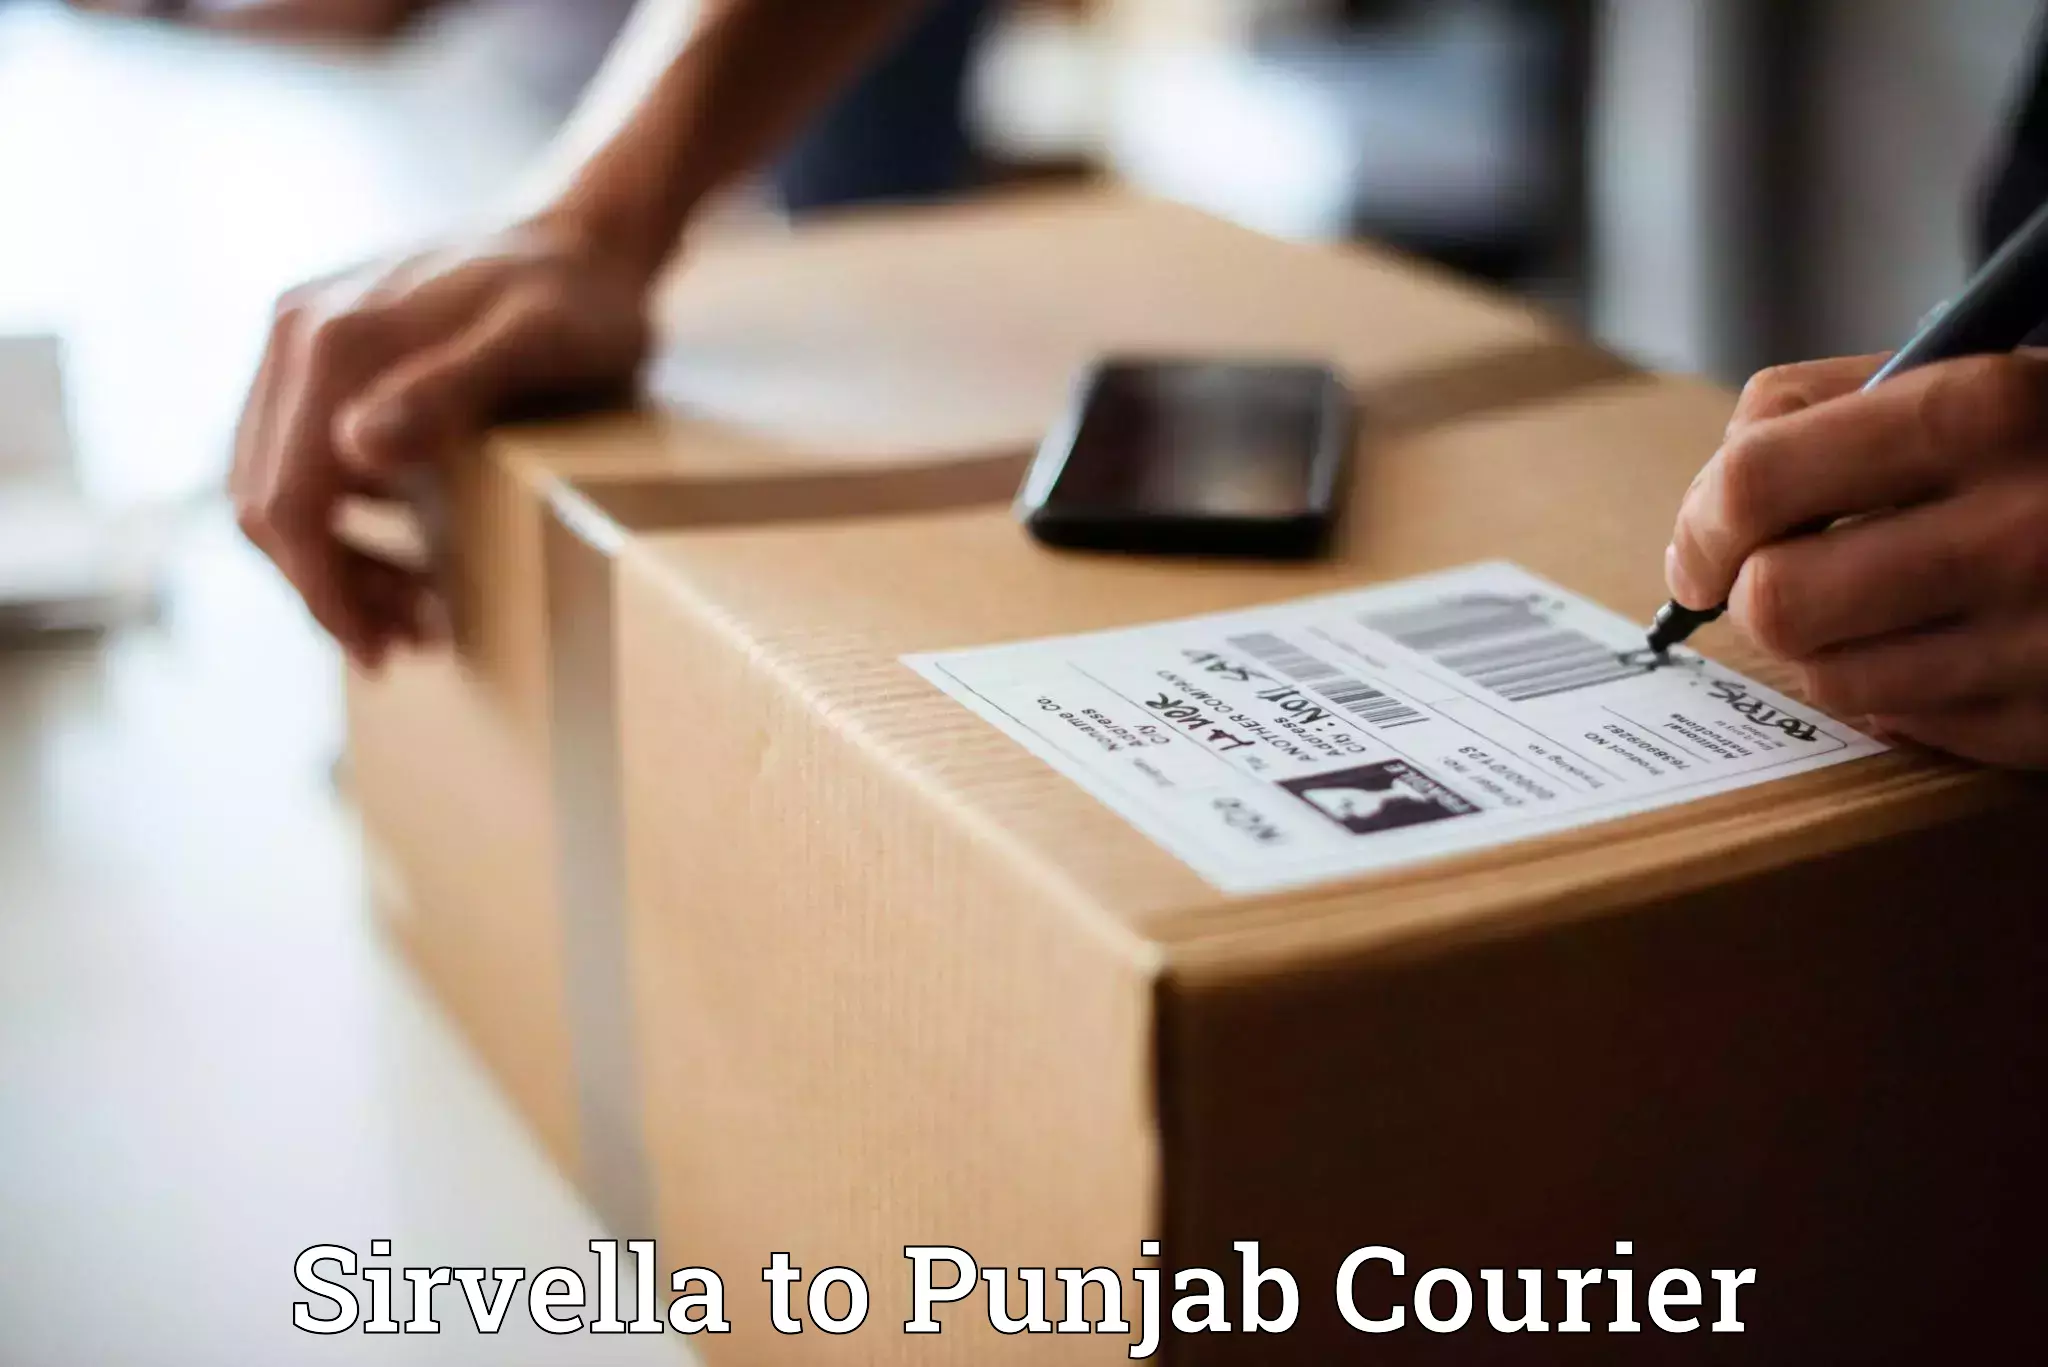 Courier service efficiency Sirvella to Ludhiana